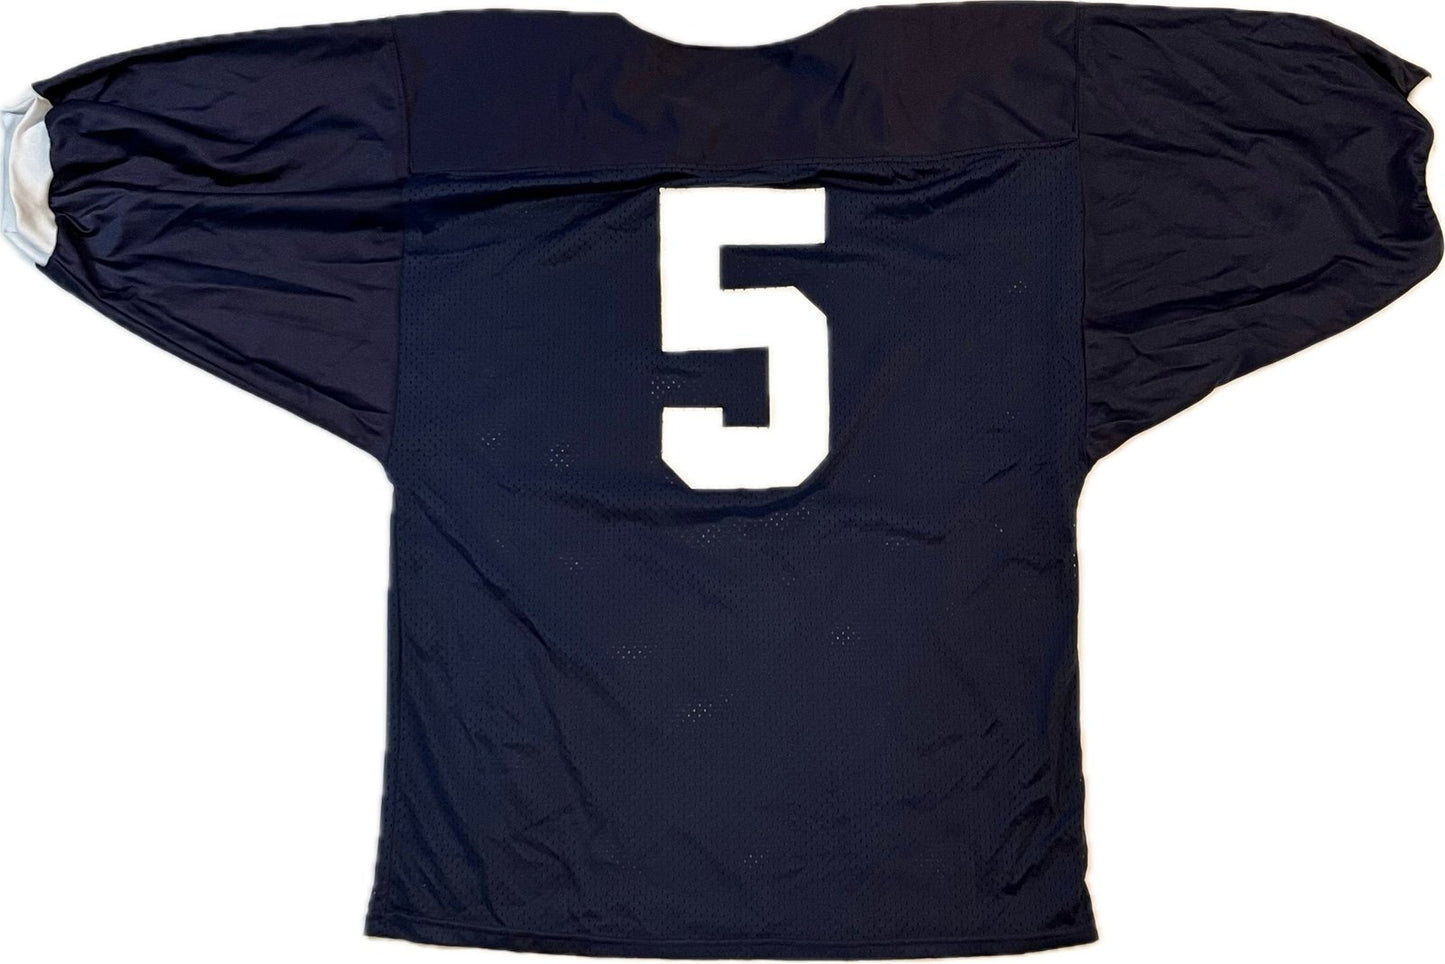 80s Penn State Nittany Lions Football Jersey